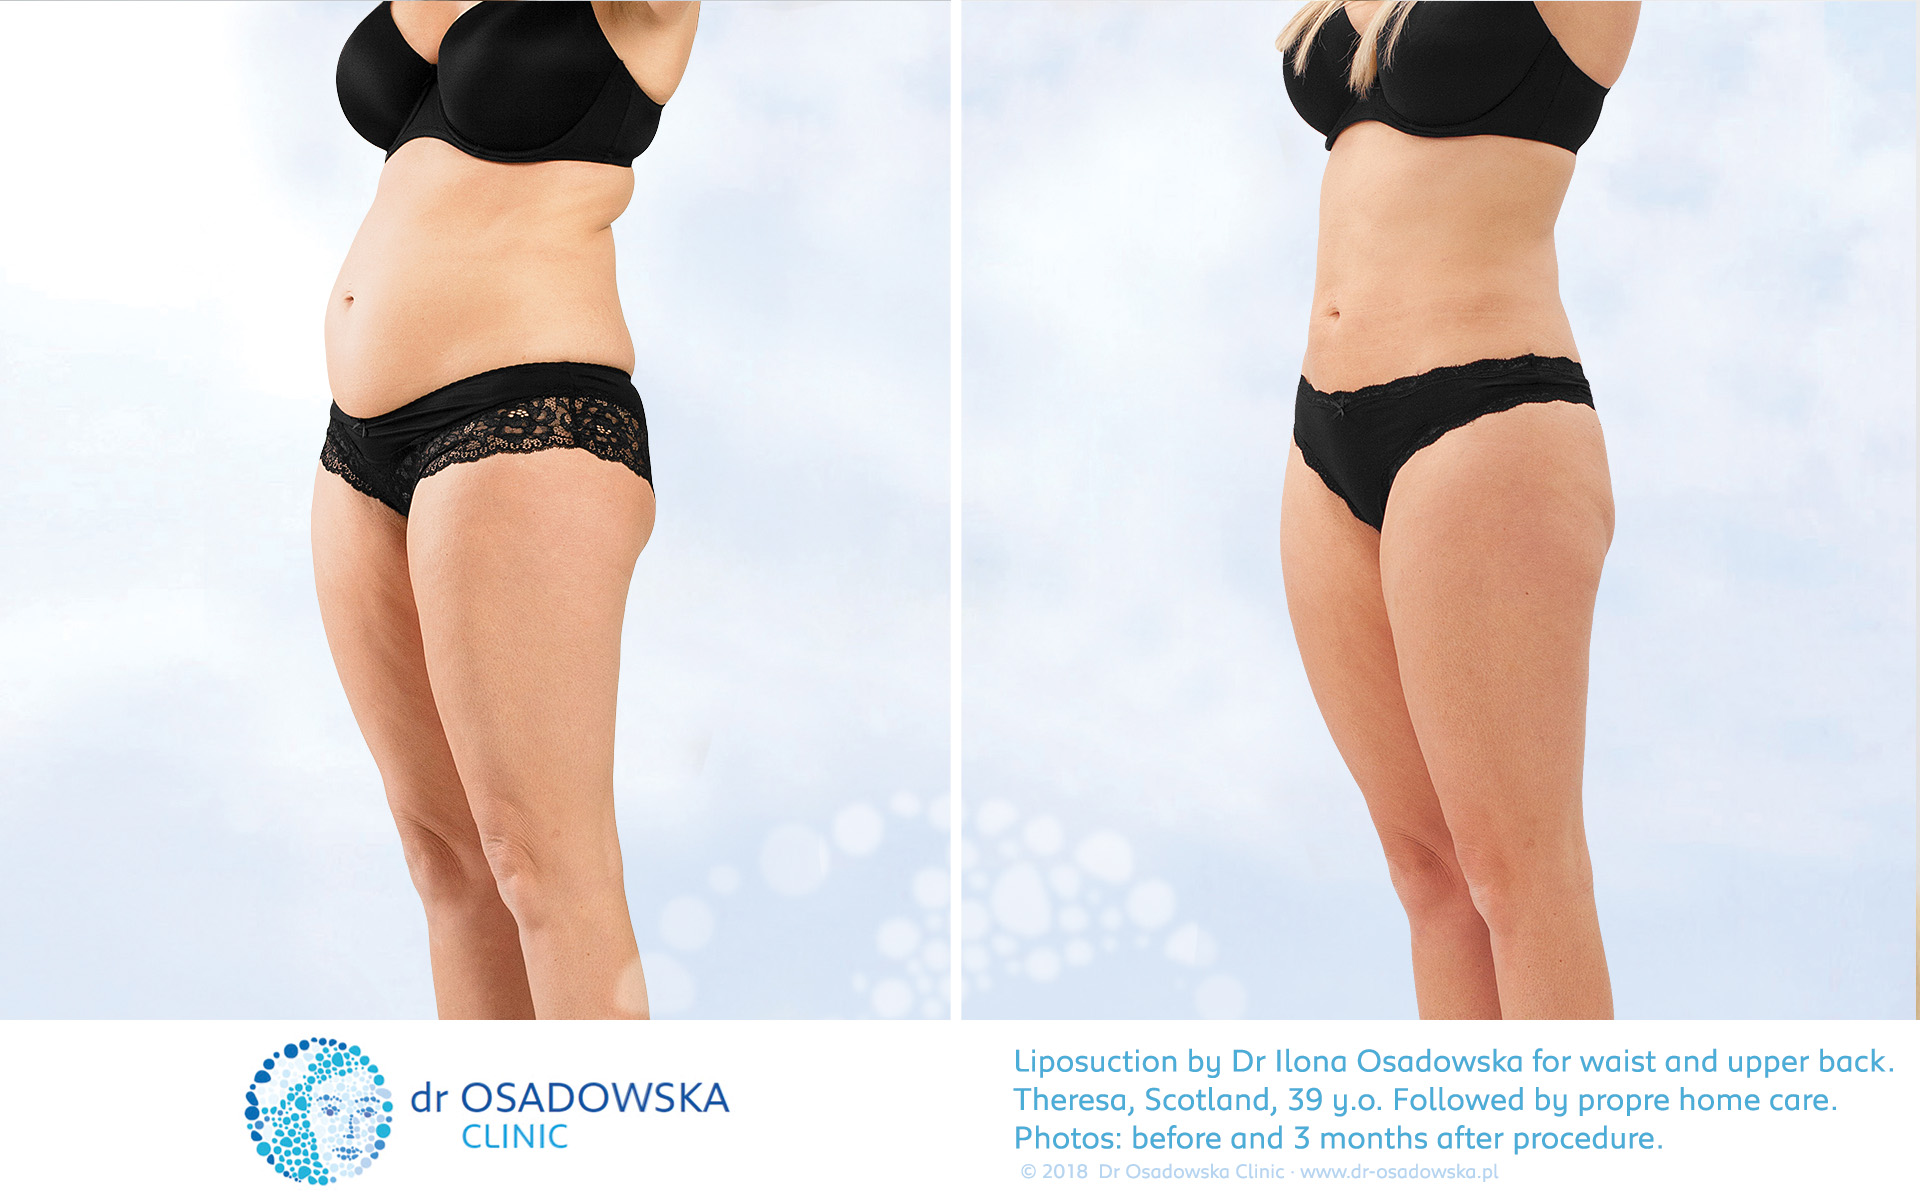 Liposuction abdomen flanks - sides, LipoLife, before after, 3 months. Theresa, Scotland.